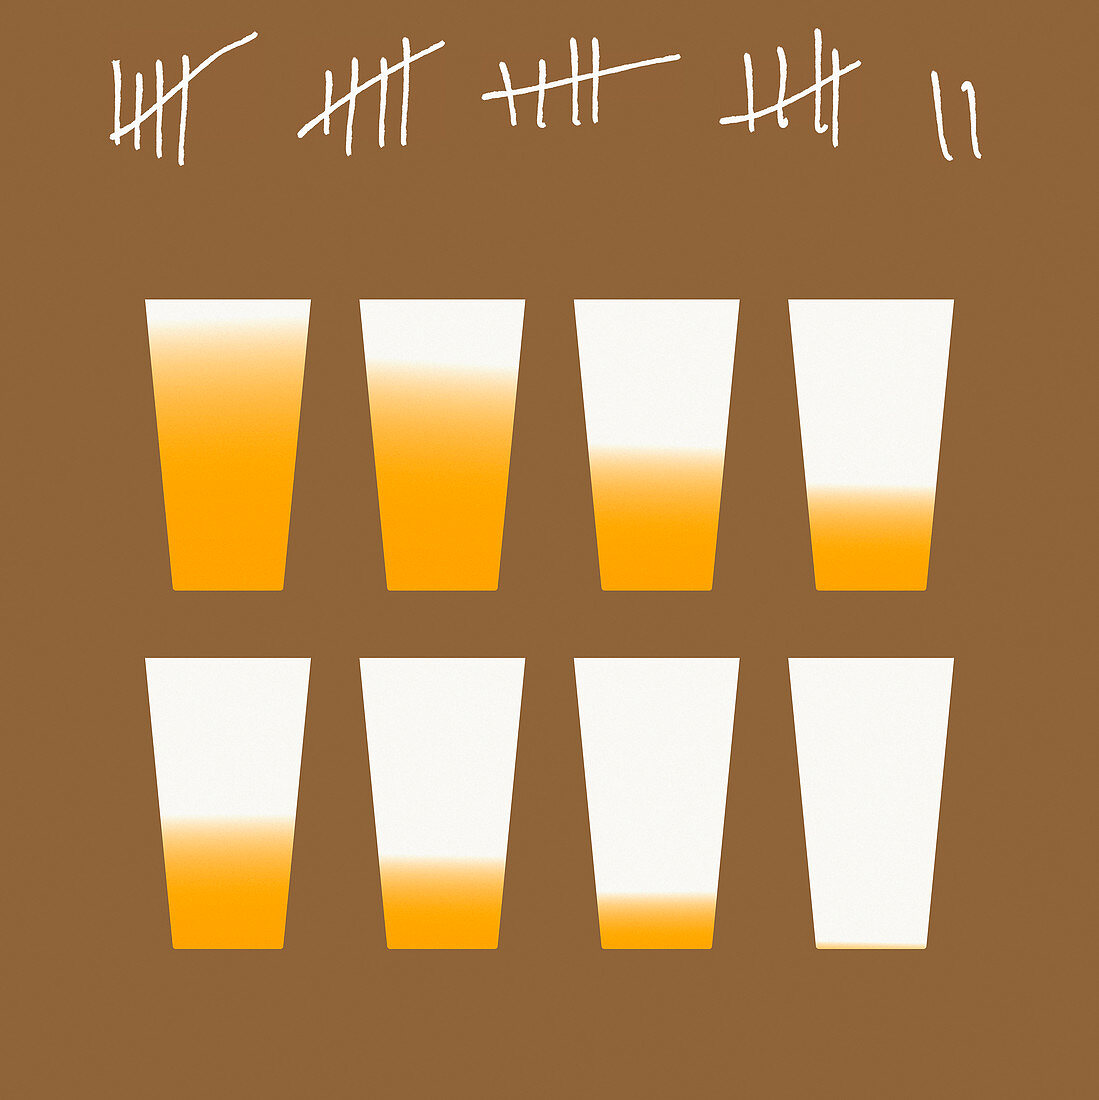 Tally chart for giving up drinking, illustration